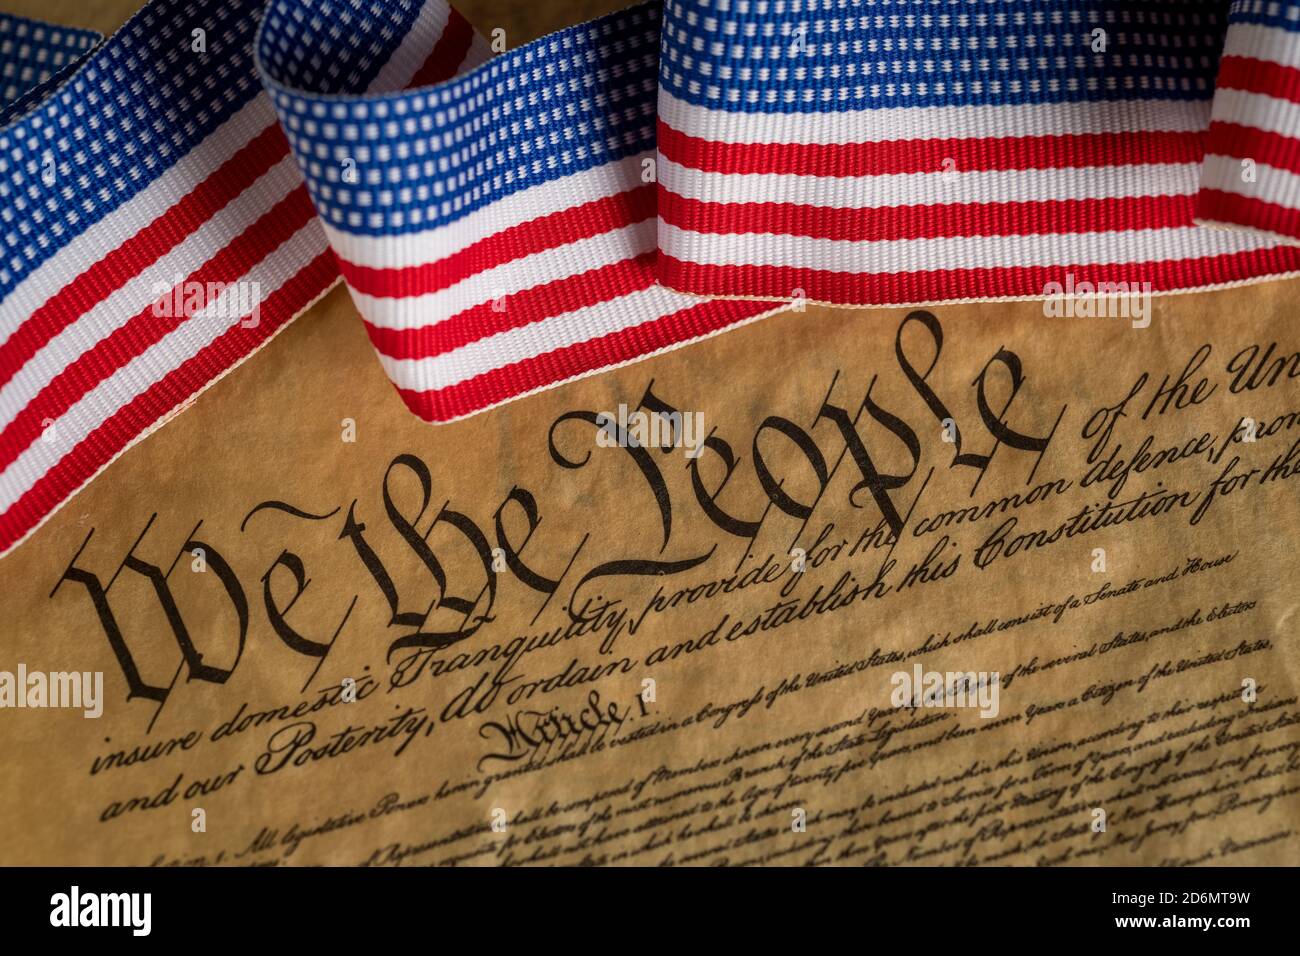 Stock photo of a copy of  the American Constitution with red, white, and blue ribbon. Stock Photo